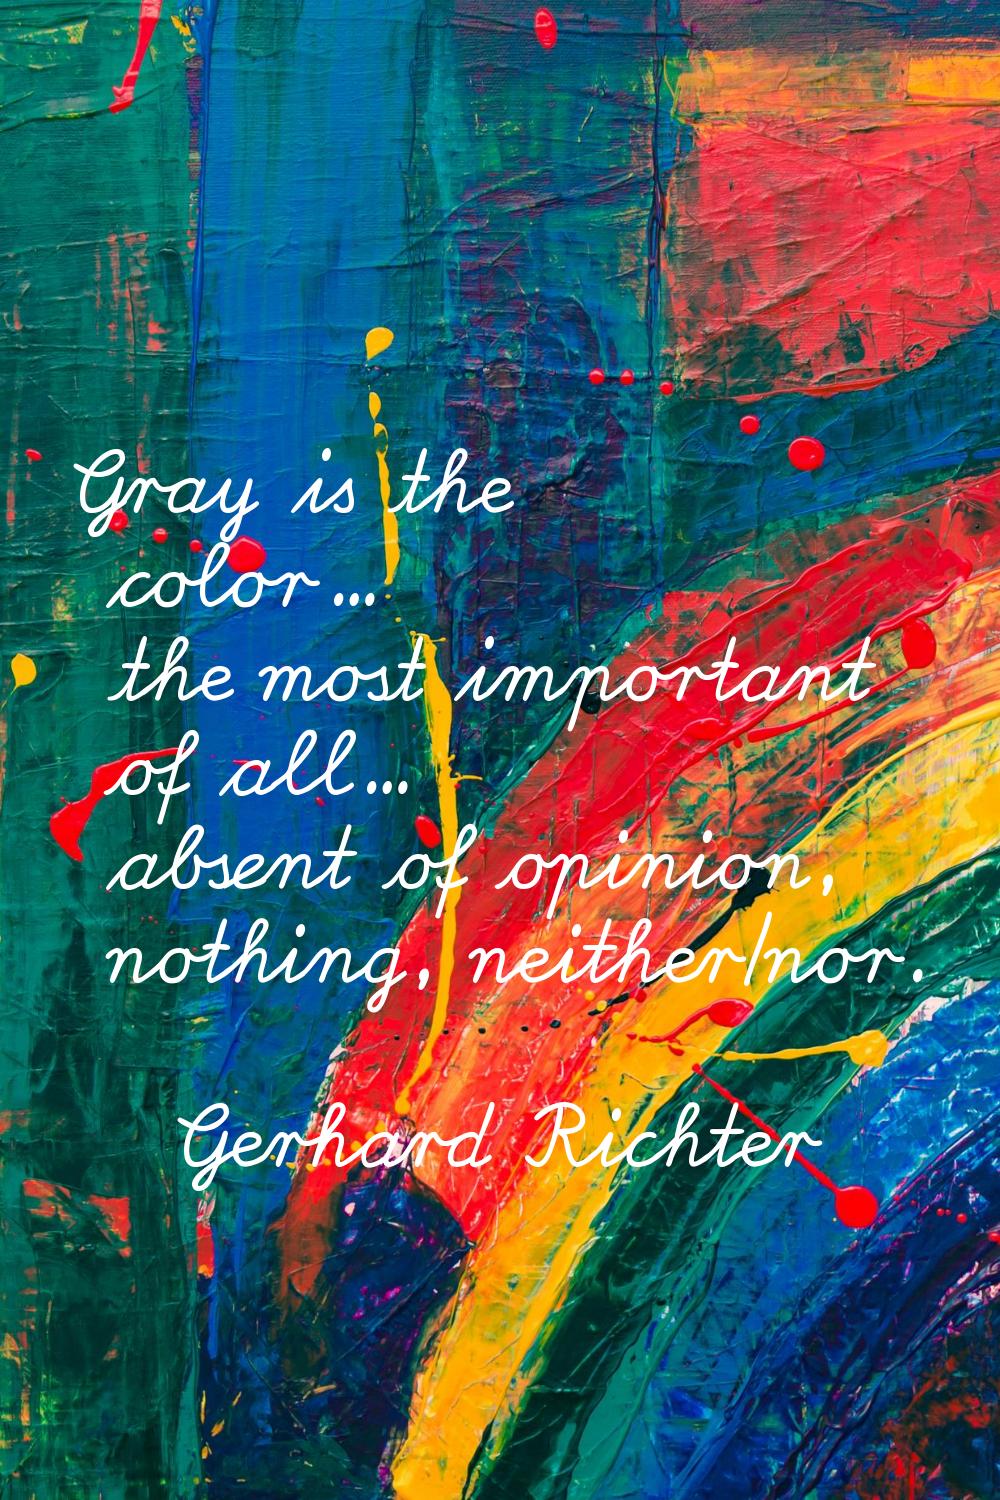 Gray is the color... the most important of all... absent of opinion, nothing, neither/nor.